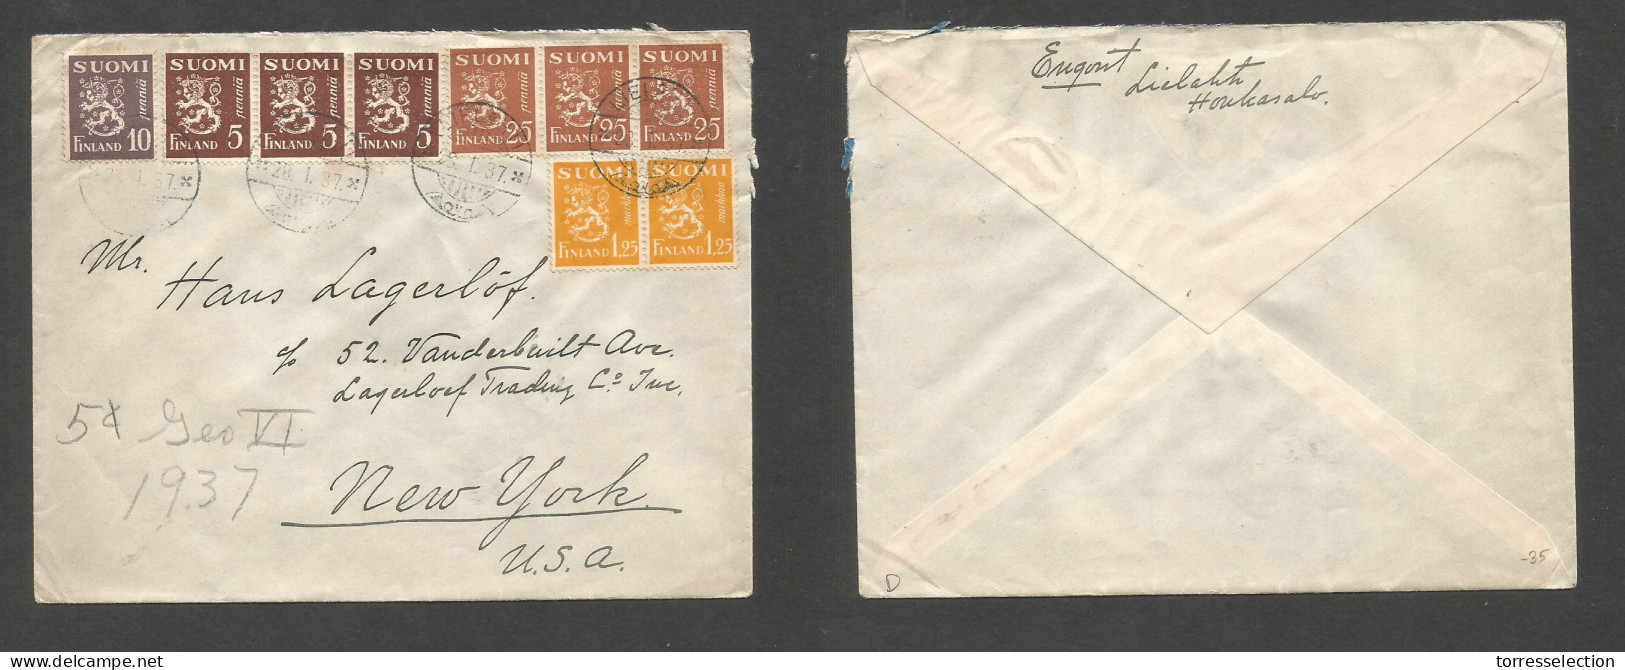 FINLAND. 1937 (28 Jan) Lielahti - USA, NYC. Multifkd Env, Cds At 3,50m Rate. VF Multiple Usage. SALE. - Other & Unclassified